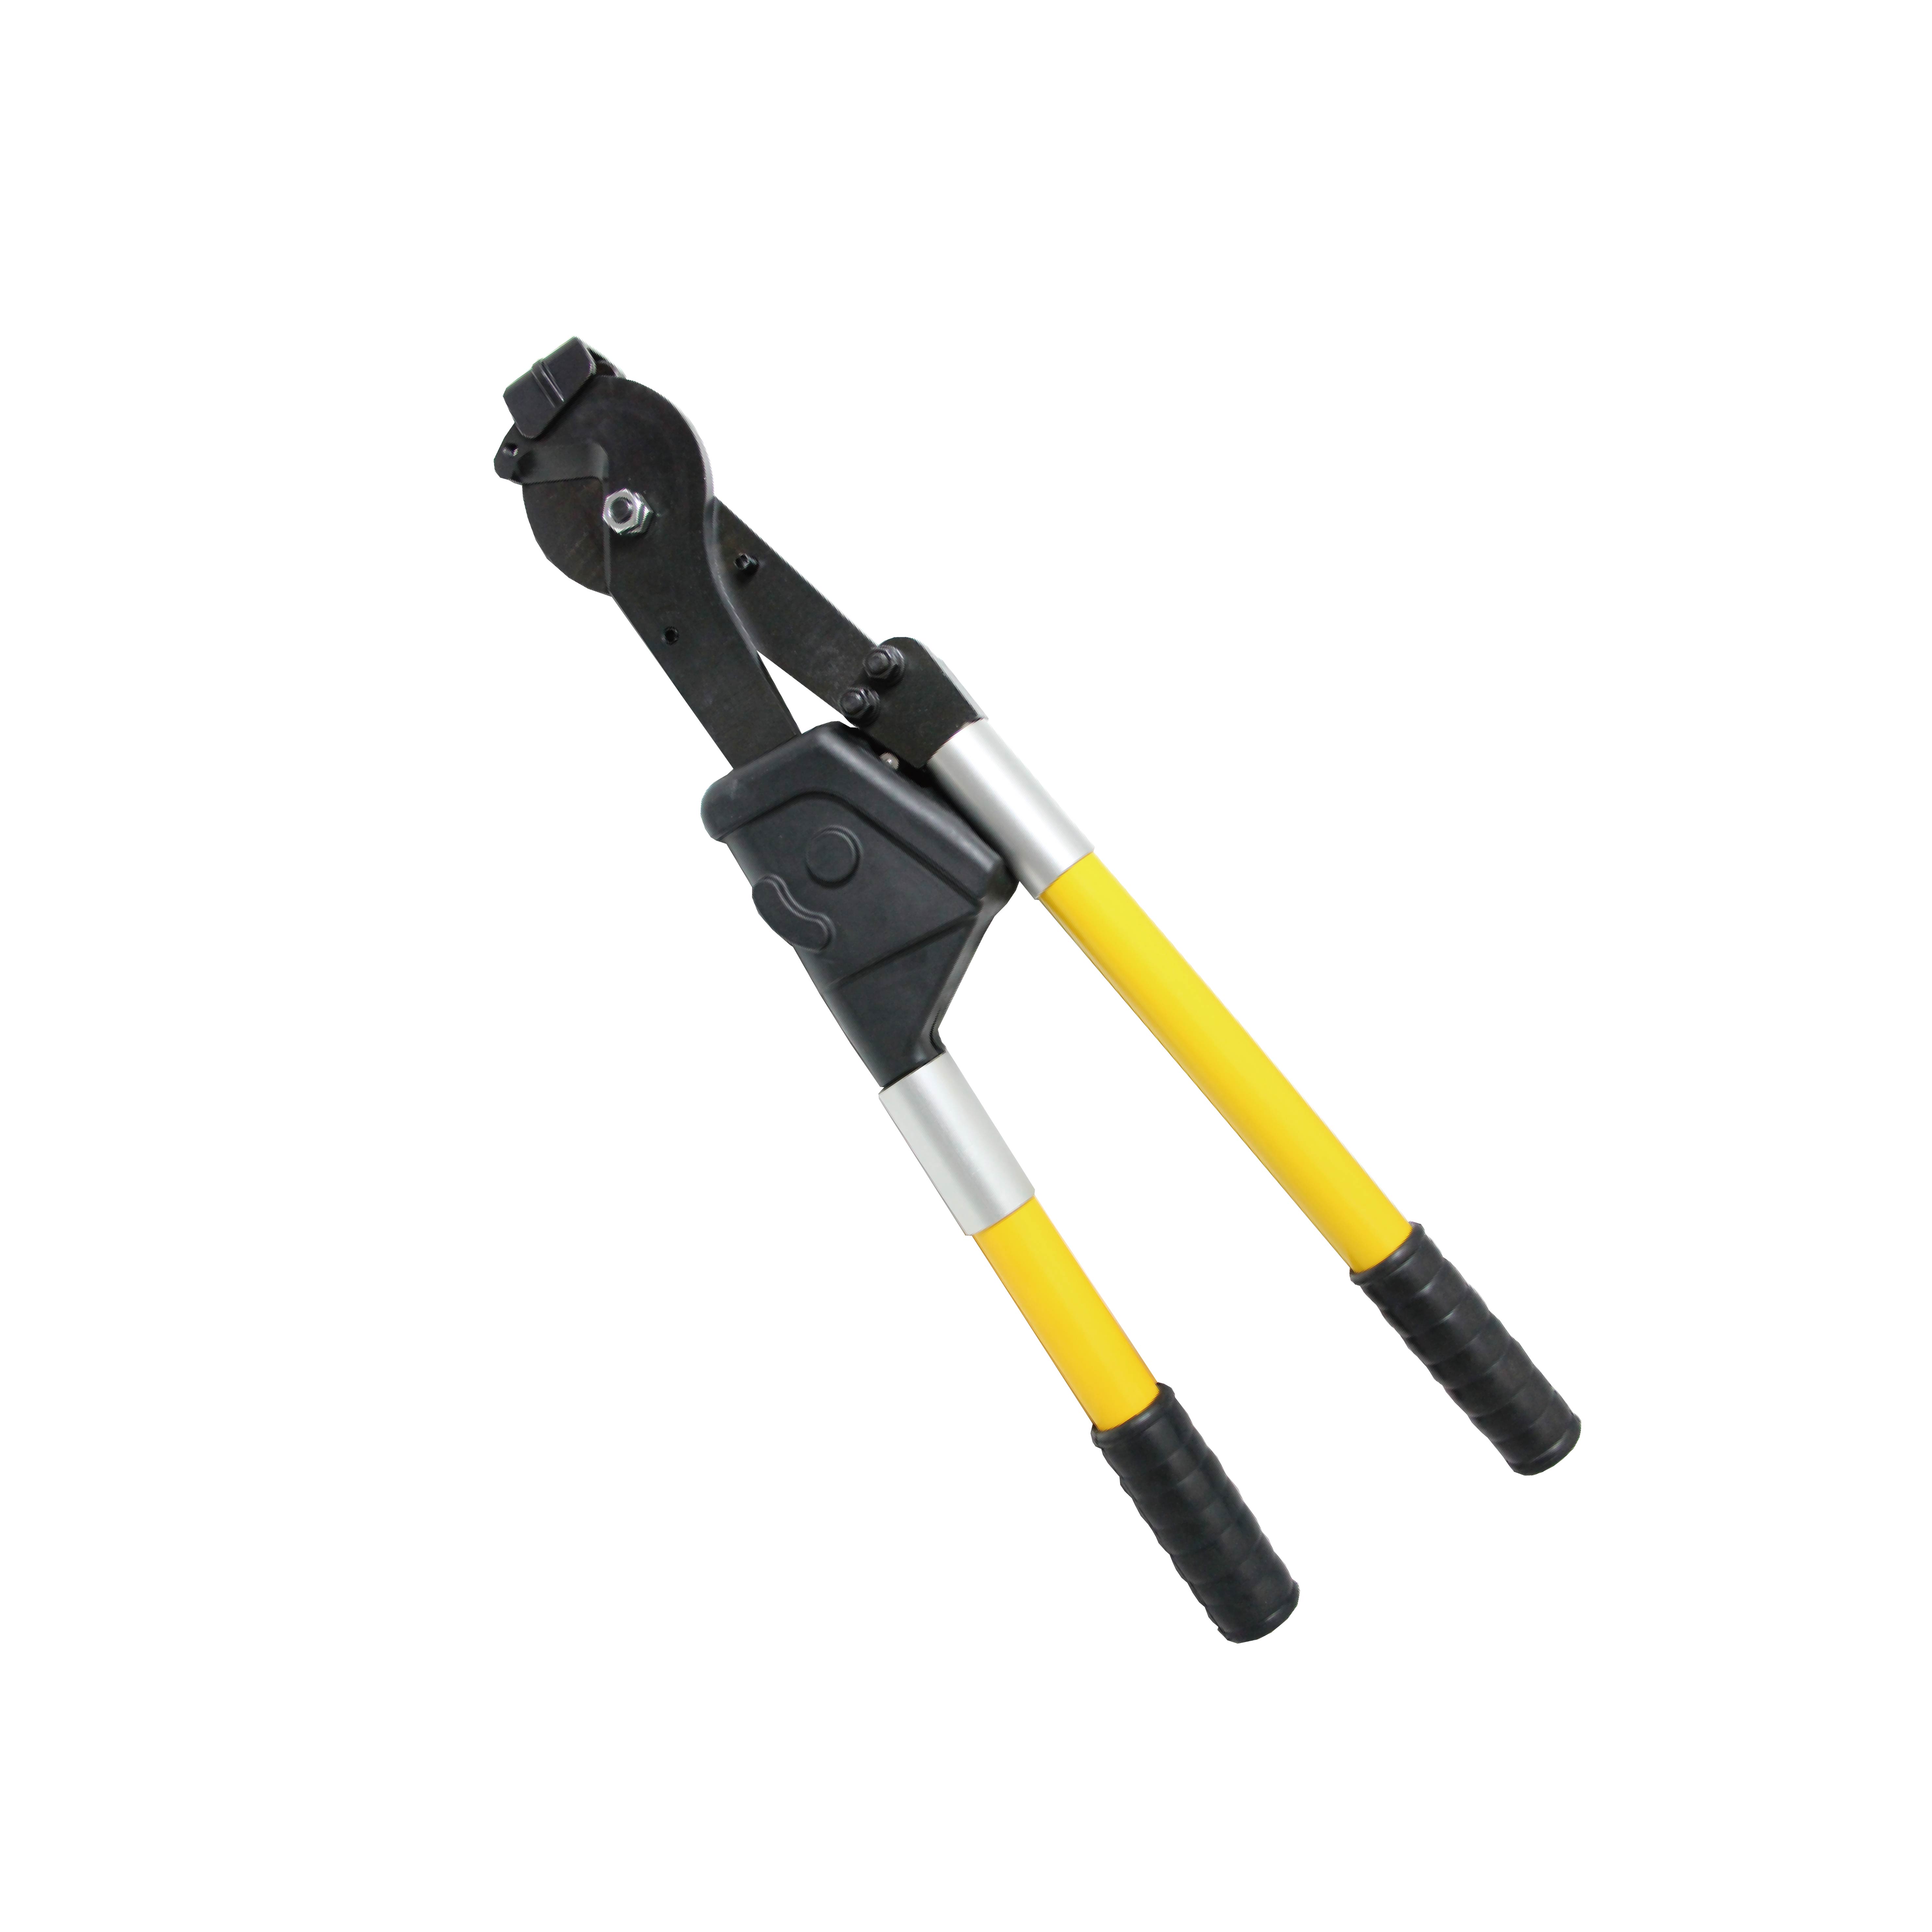 AC-300 HAND CABLE CUTTERS-AC-300 